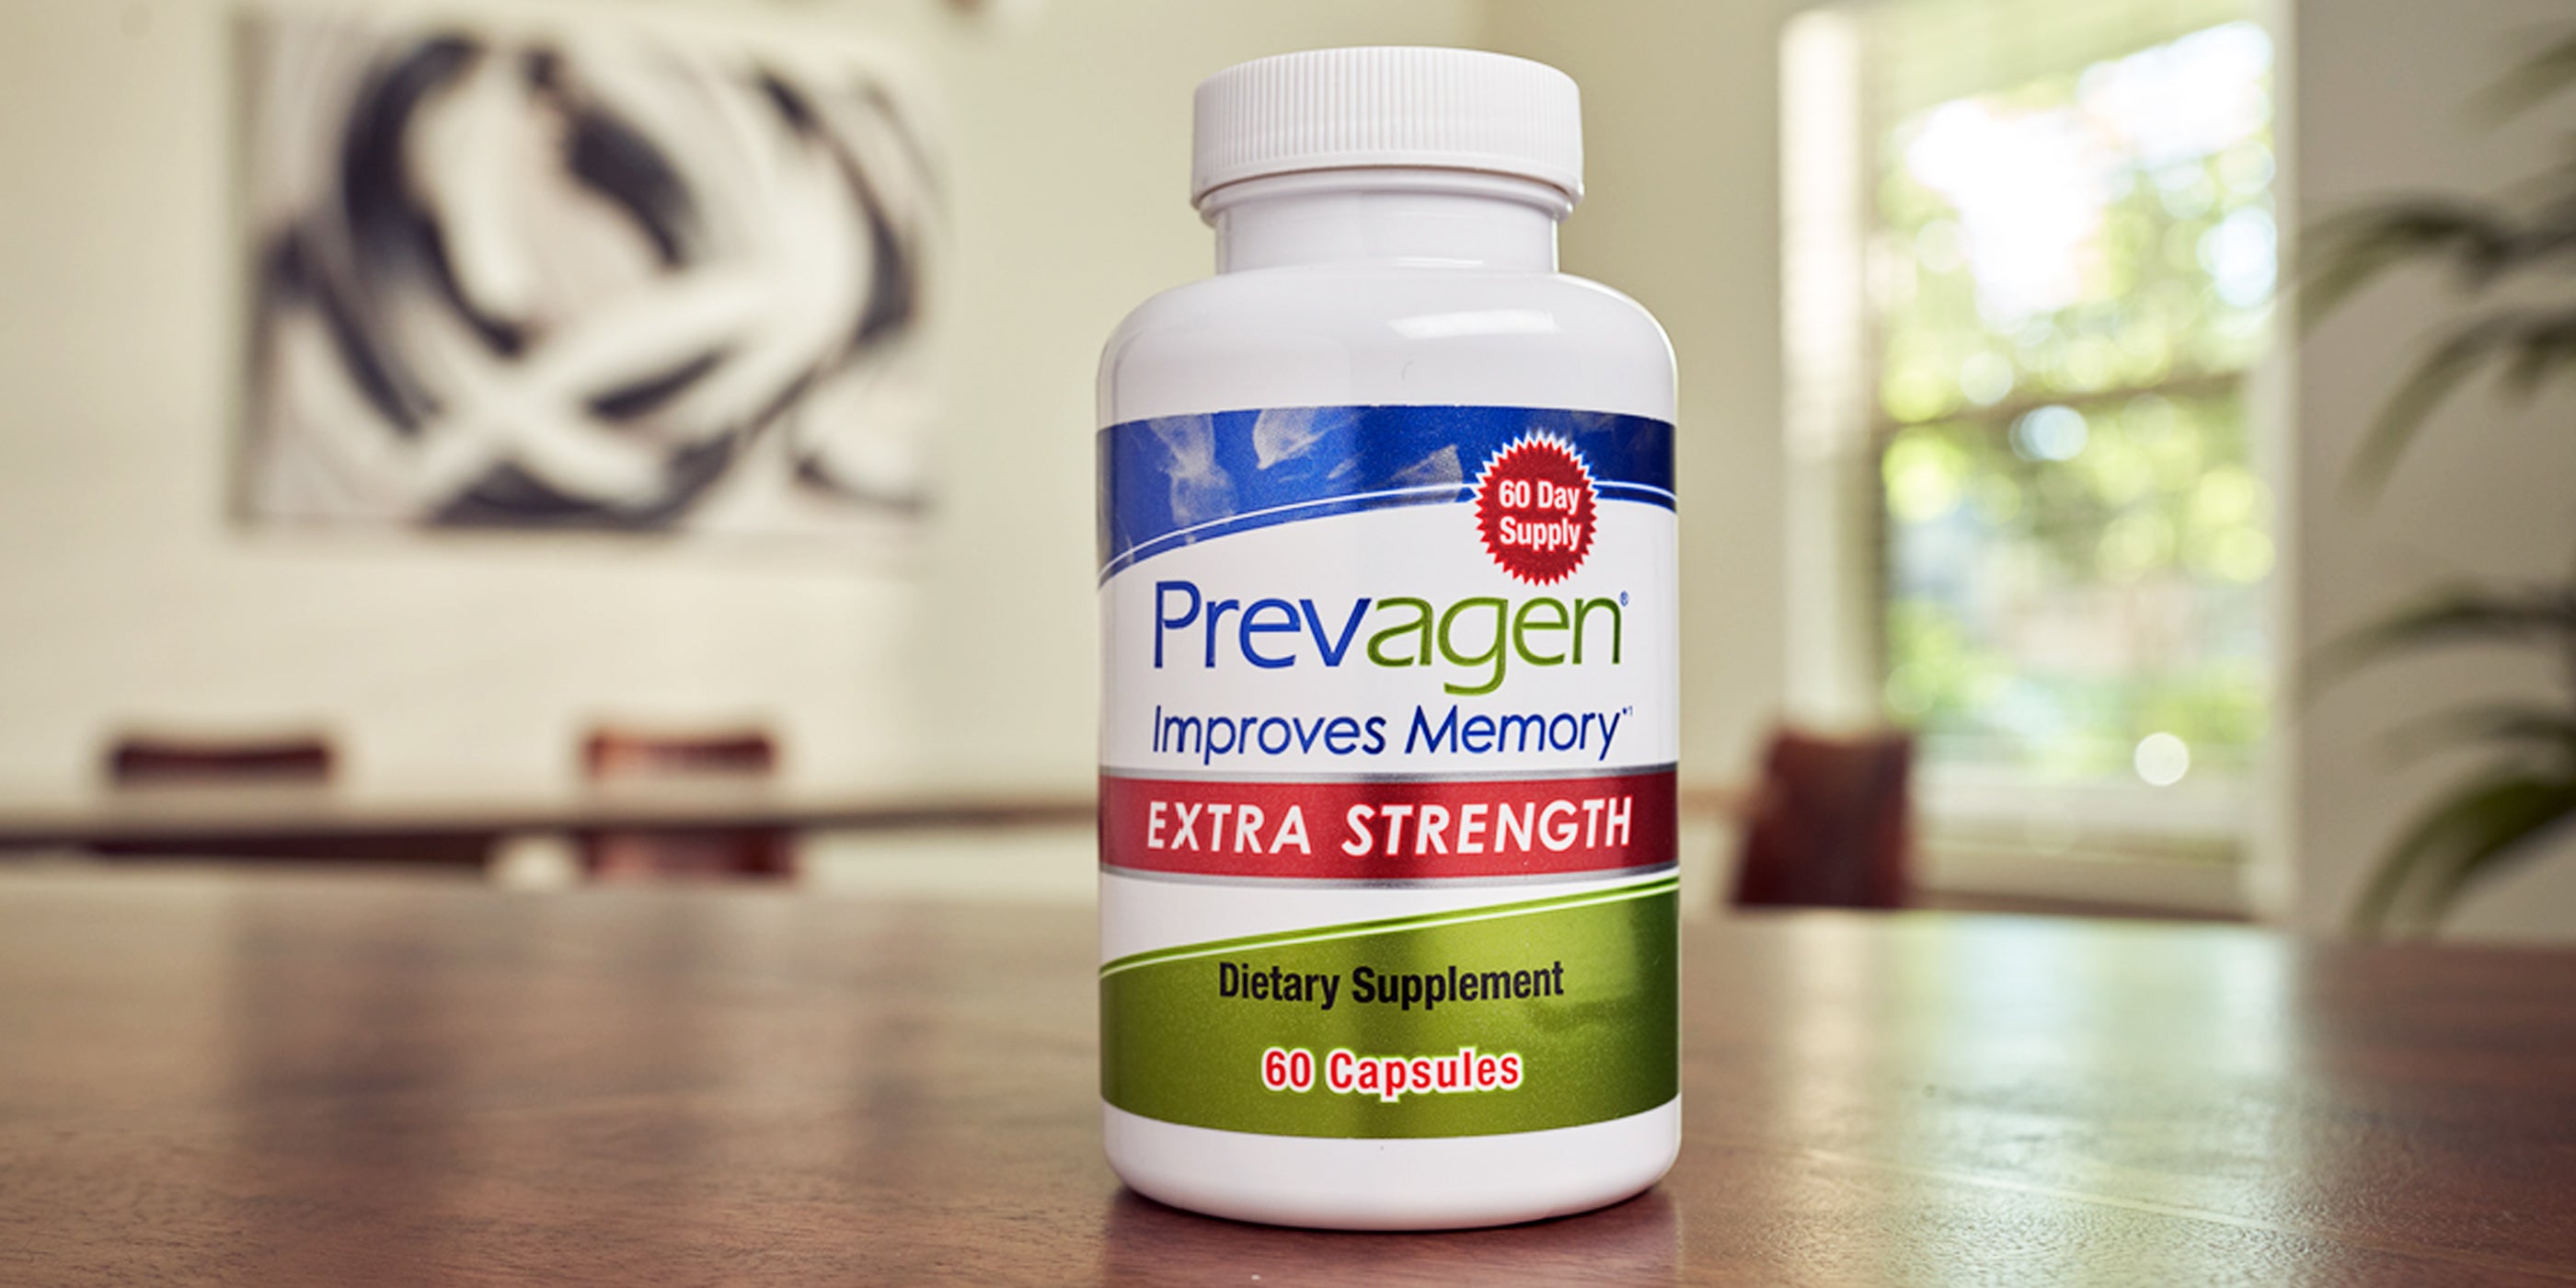 Prevagen bottle of extra strength 60 day supply in kitchen